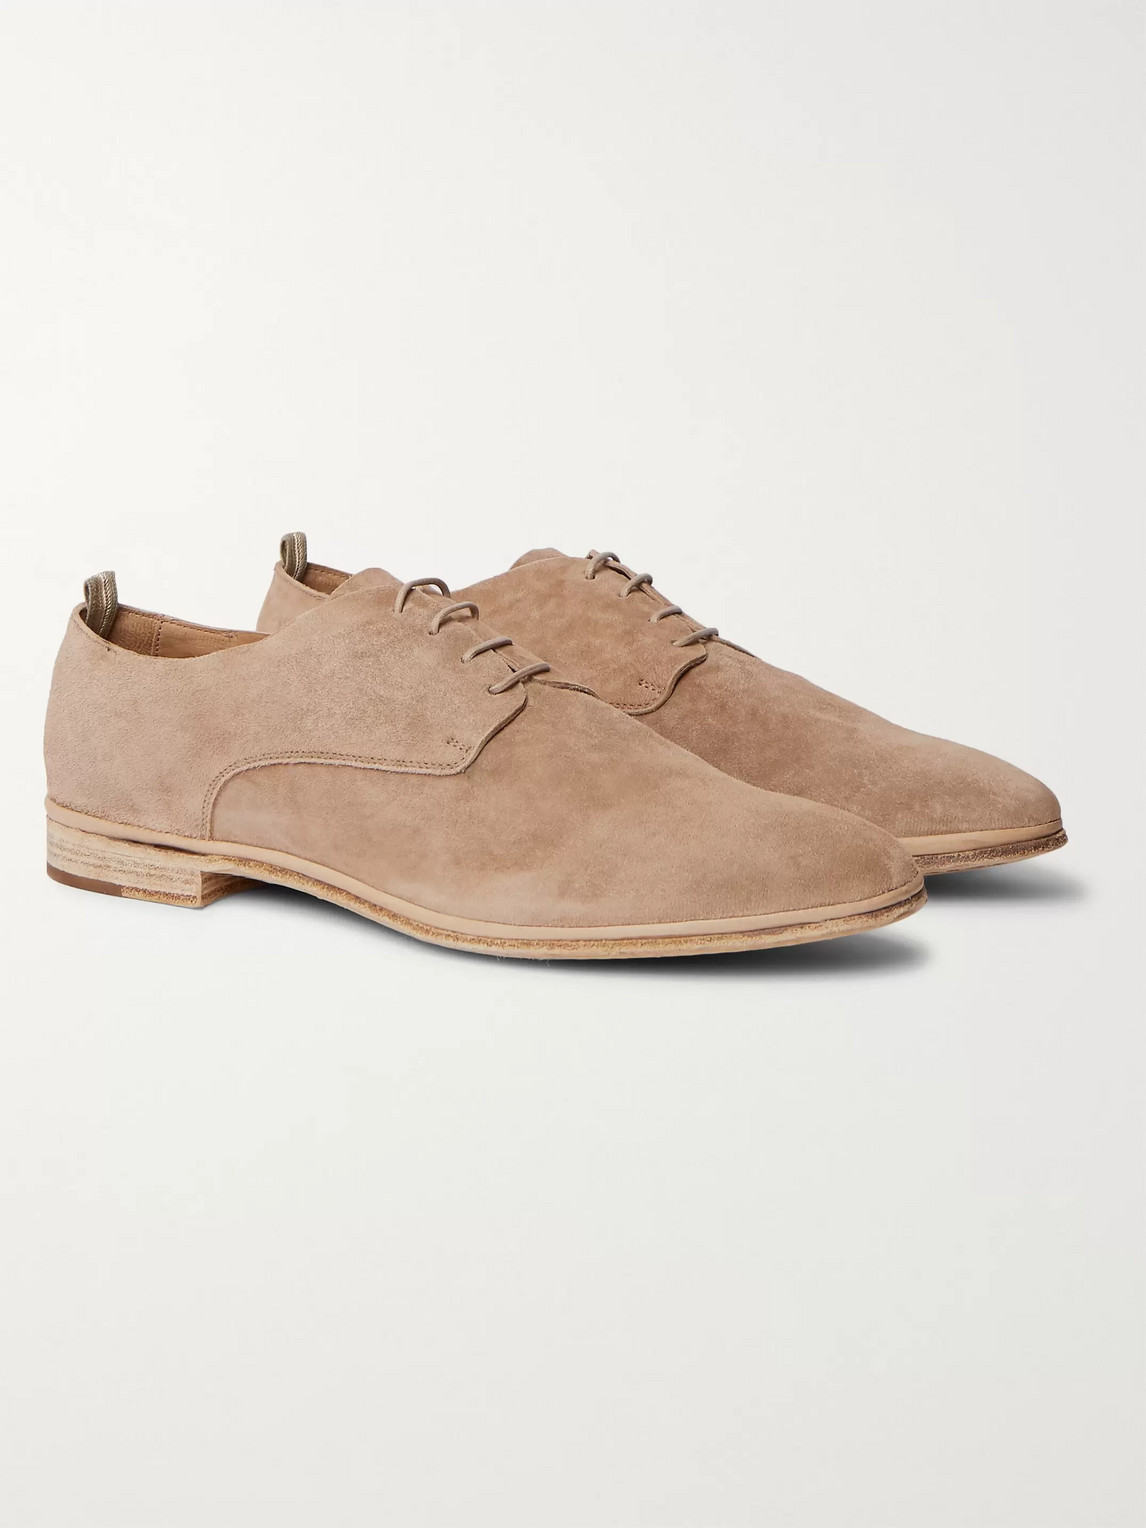 OFFICINE CREATIVE CALIFORNIA LEATHER OXFORD SHOES